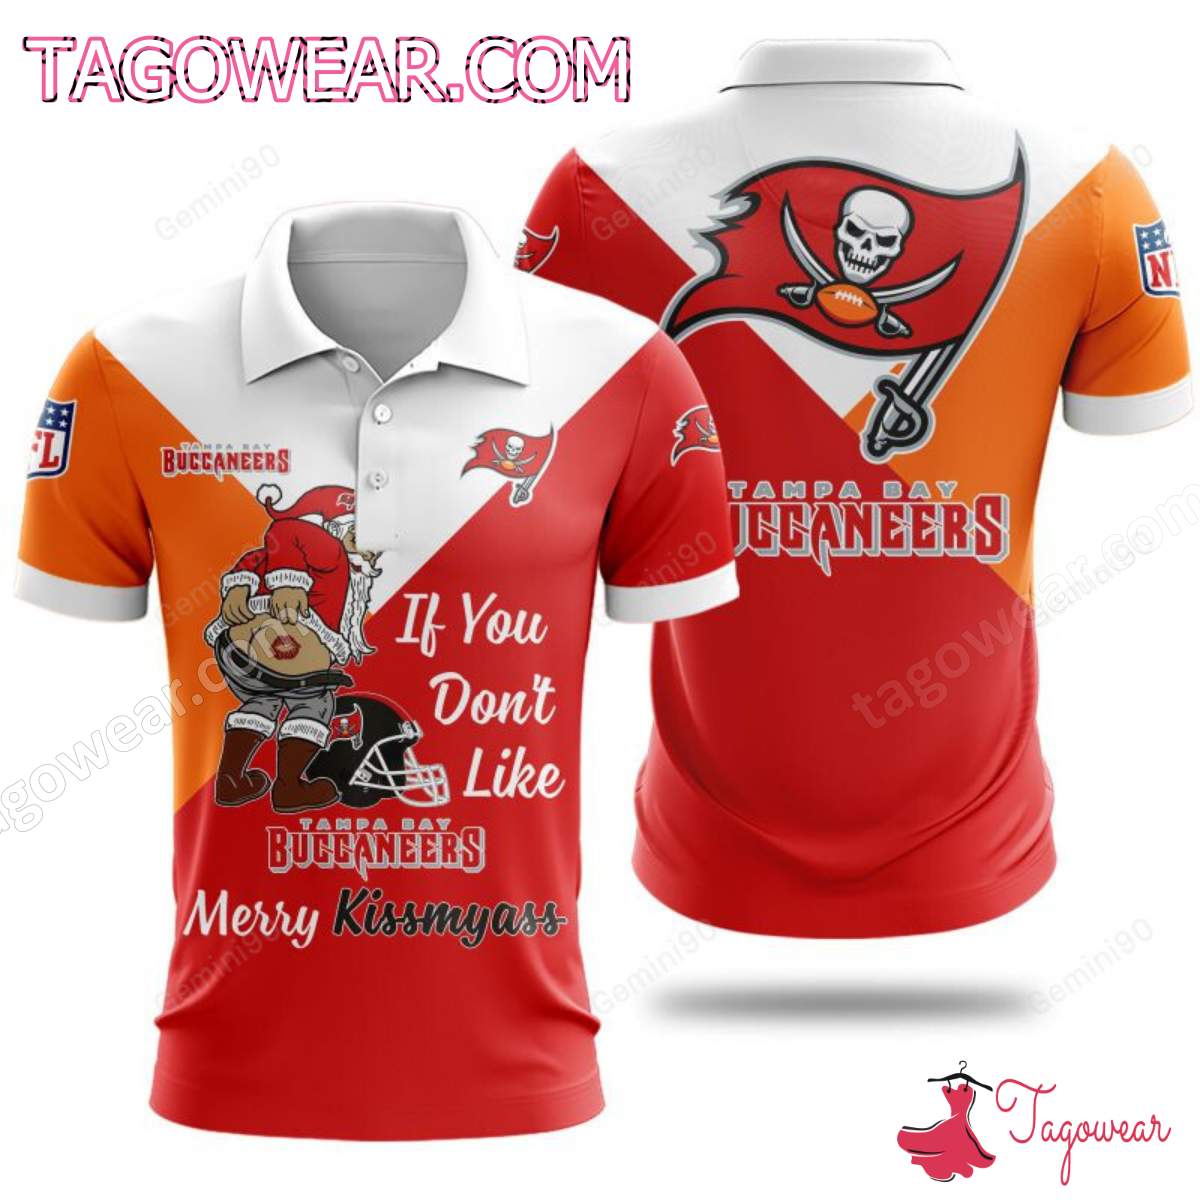 If You Don't Like Tampa Bay Buccaneers Merry Kissmyass T-shirt, Polo, Hoodie